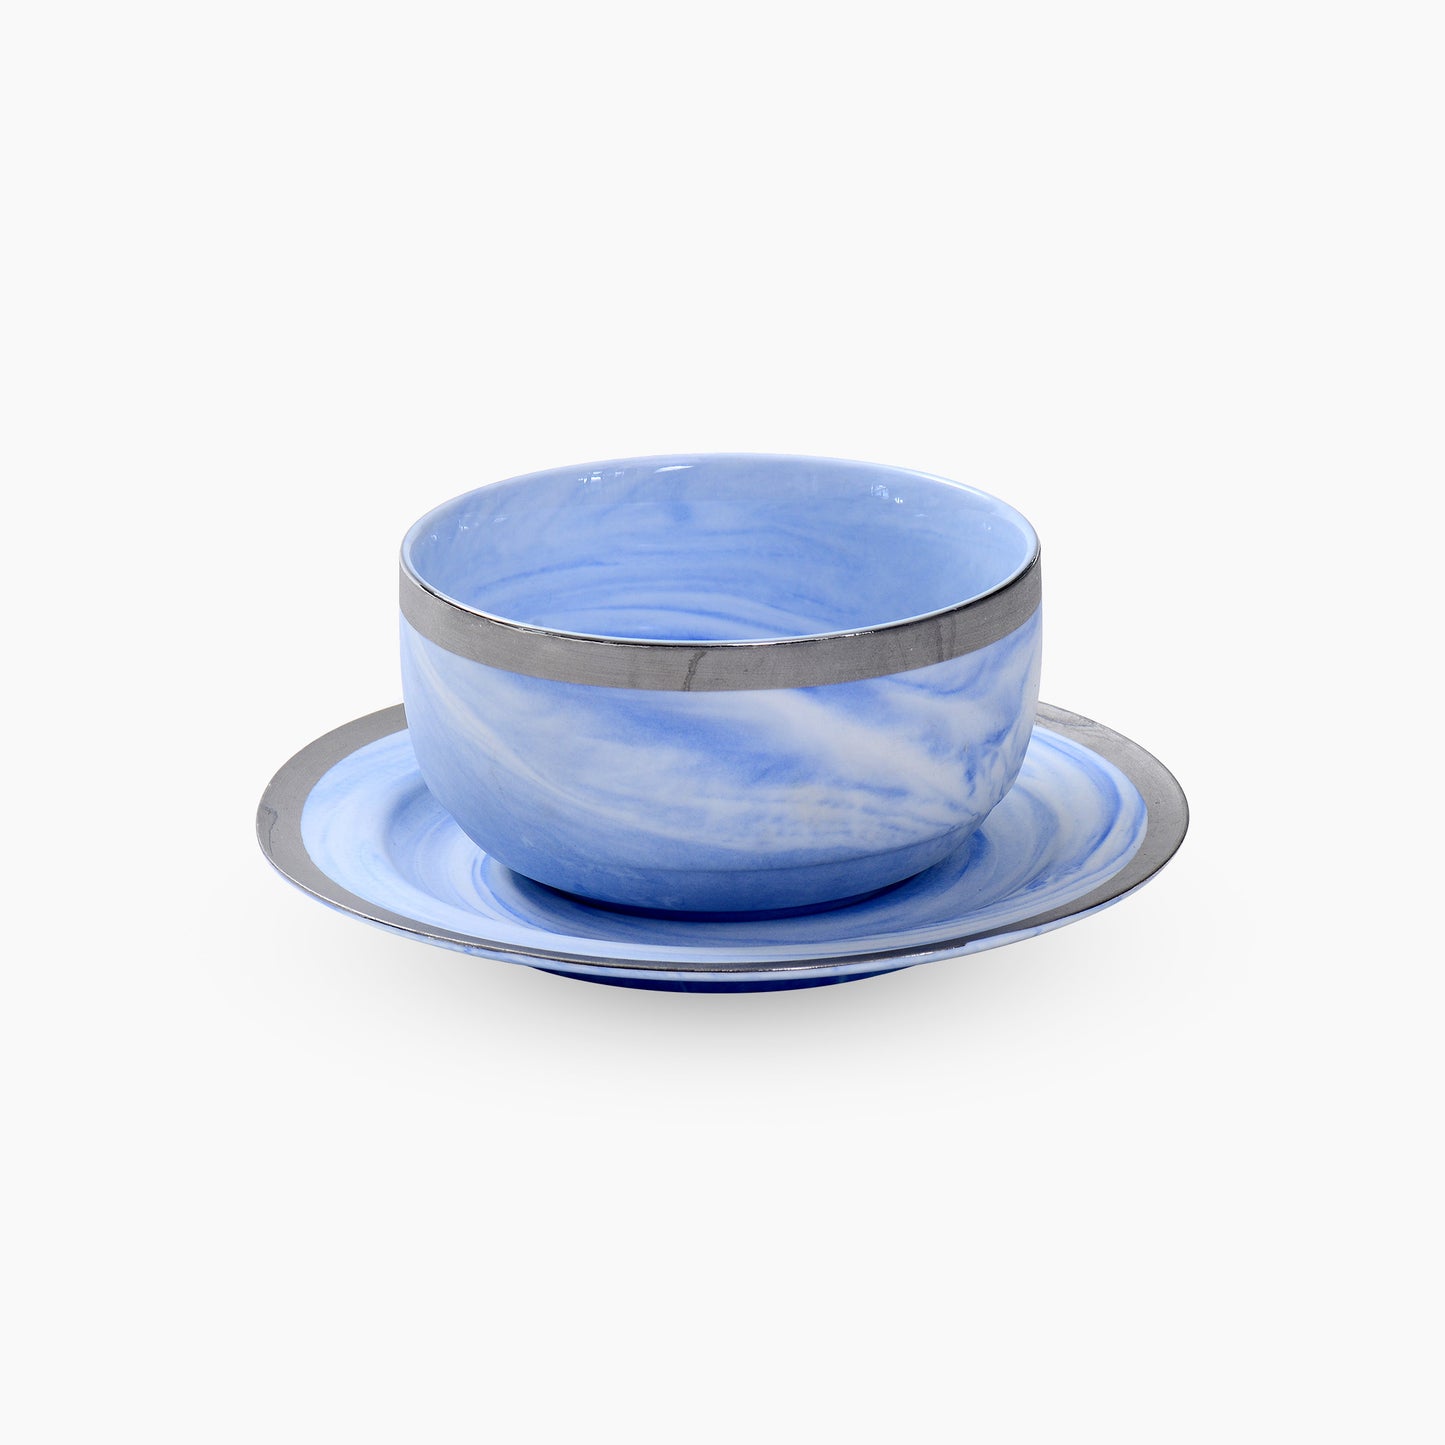 Marble Finish Light Blue with Silver rim 6 Bowls and 6 Saucers set